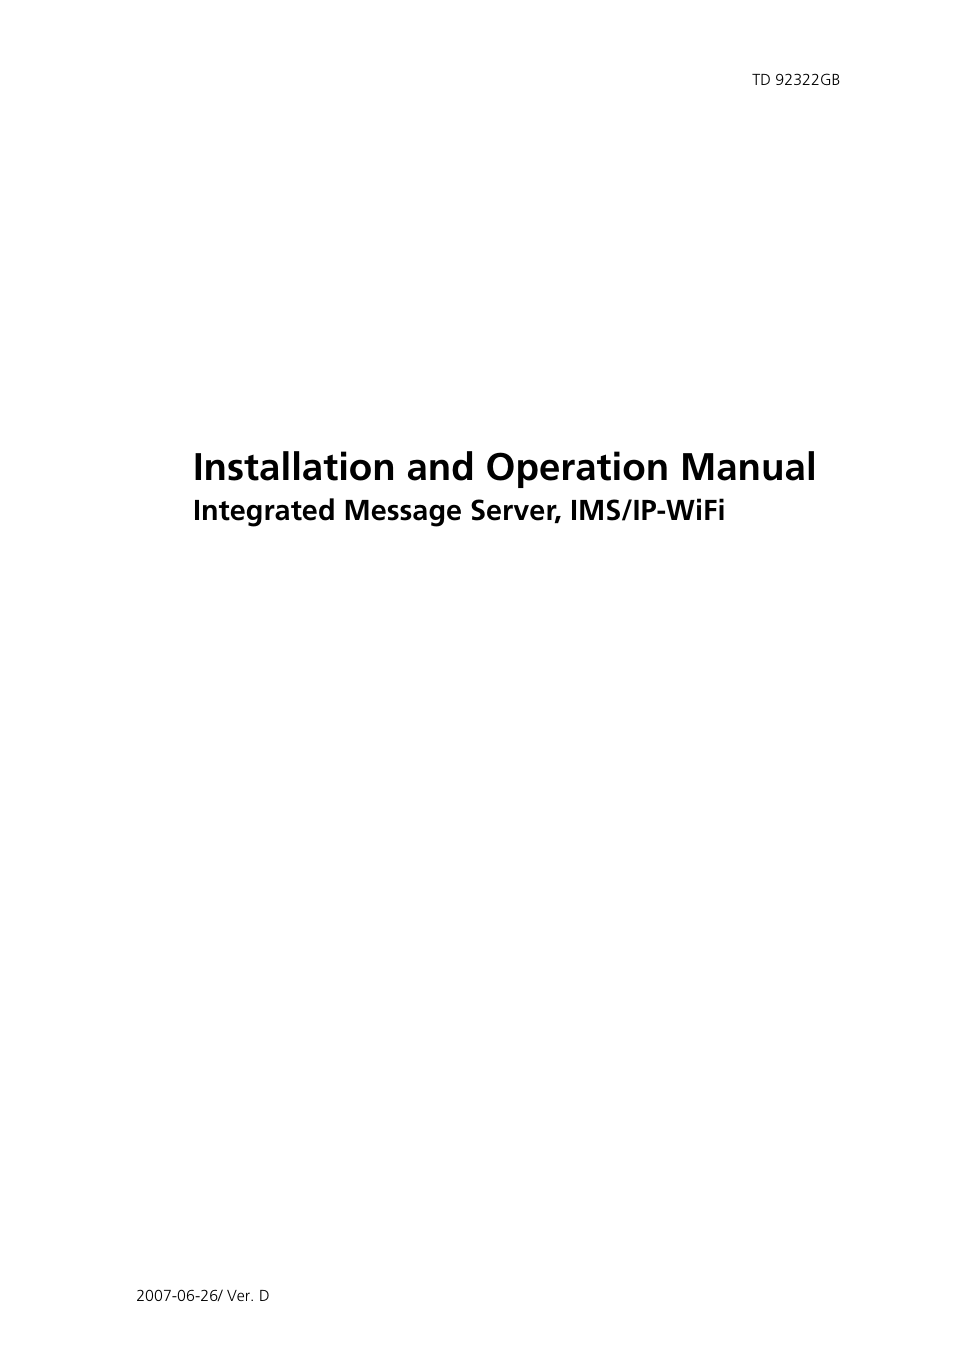 Cisco TD 92322GB User Manual | 34 pages